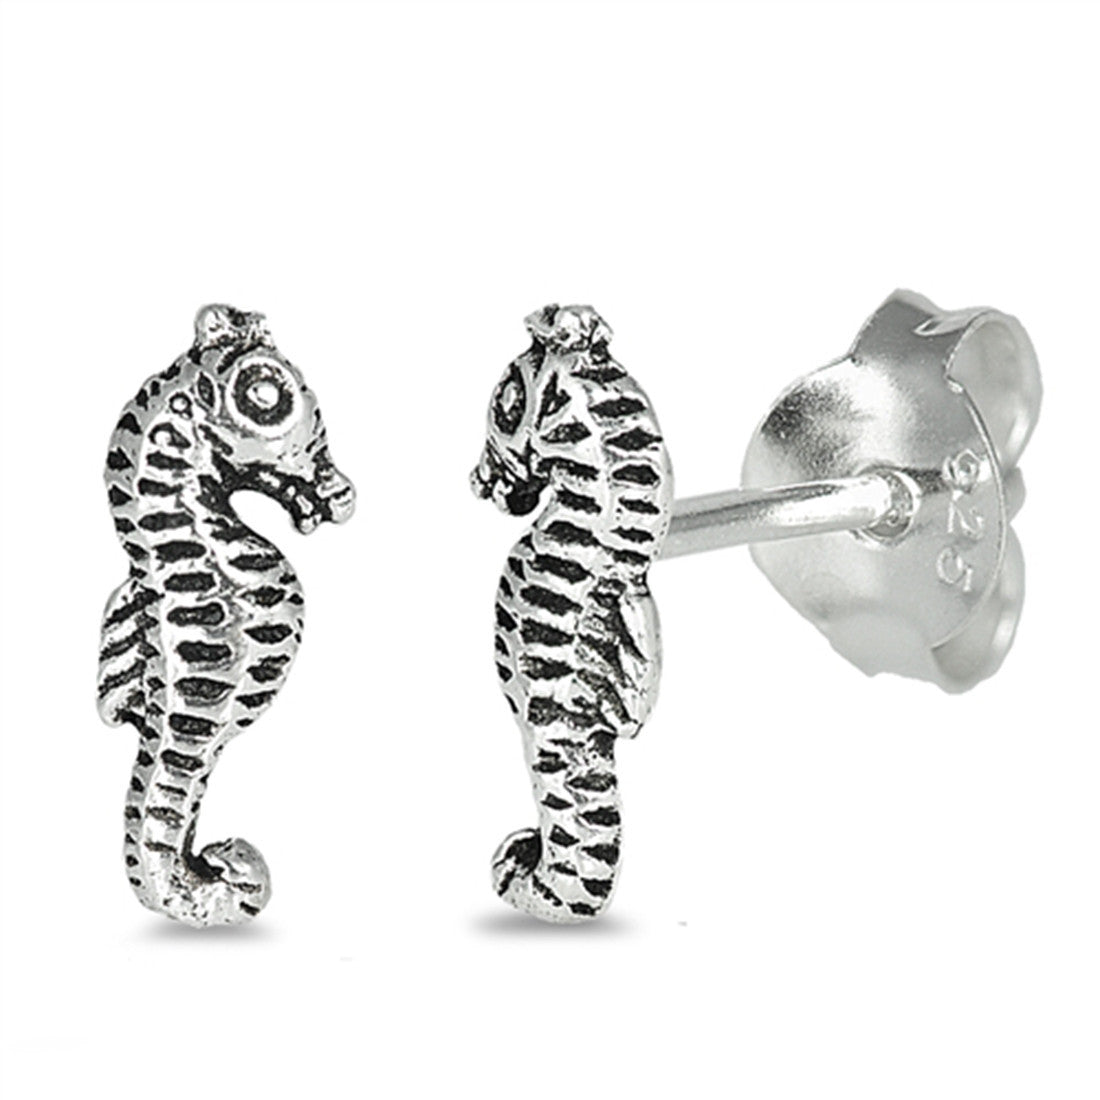 8mm Tiny Small Seahorse Stud Post Earrings 925 Sterling Silver Choose Color - Blue Apple Jewelry